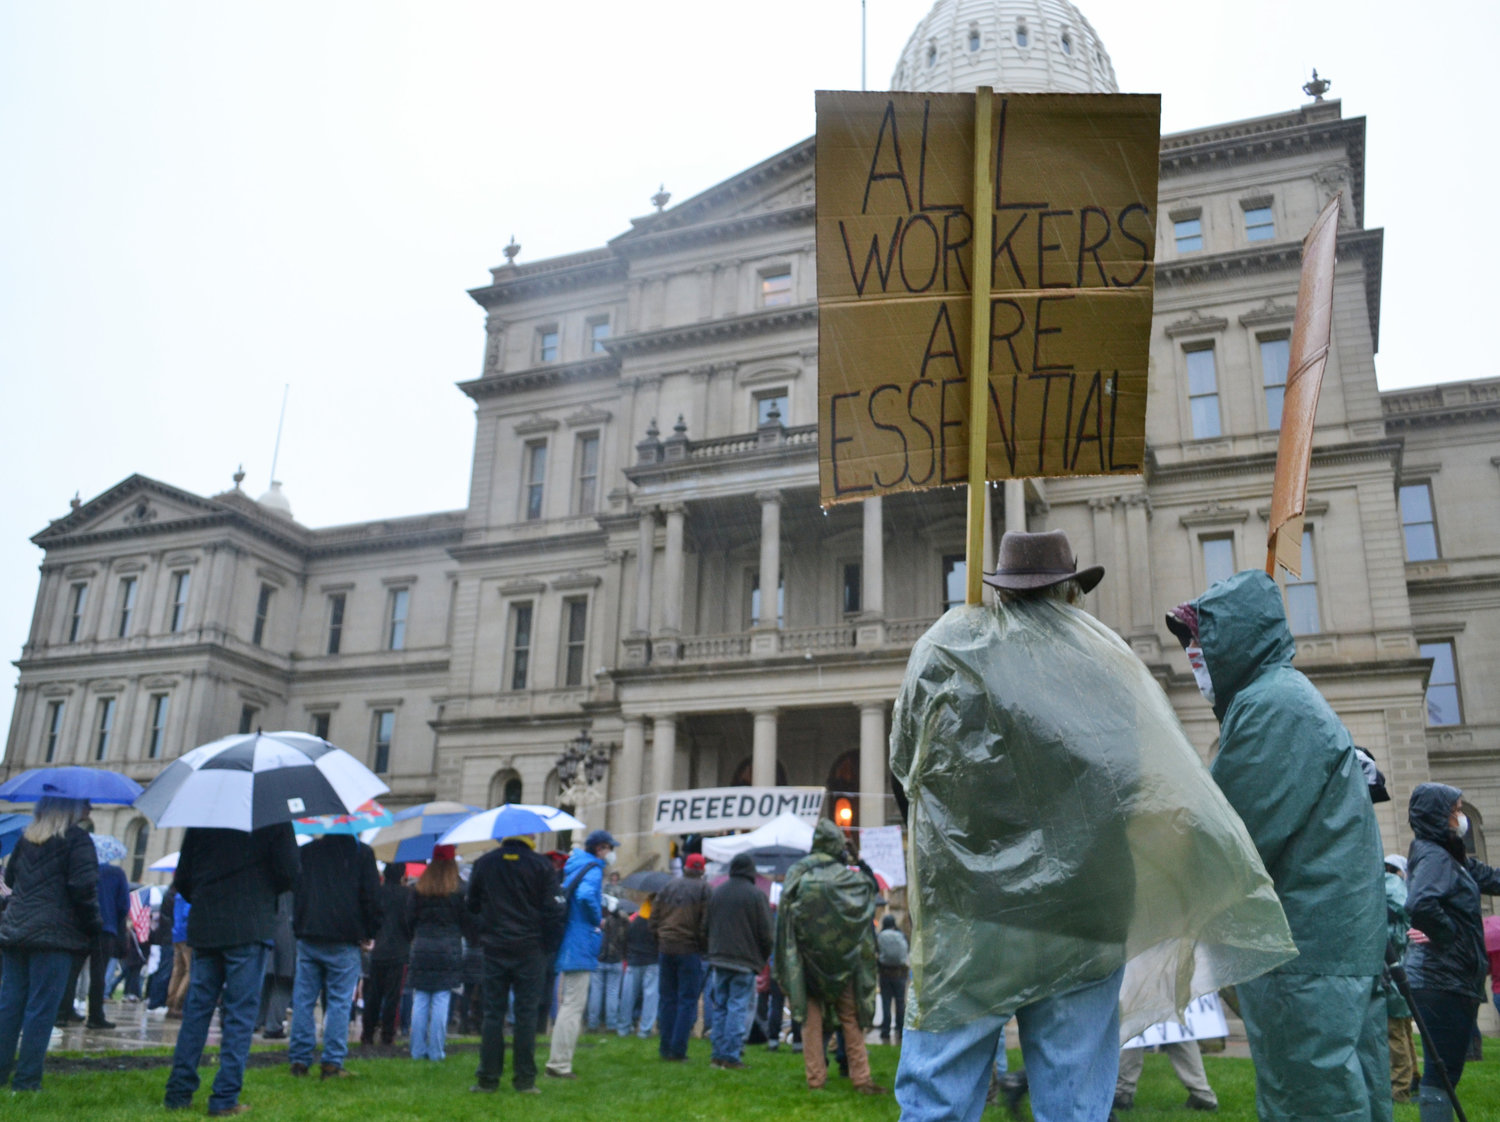 A protester in the rain carrying a sign reading, "All workers are essential."